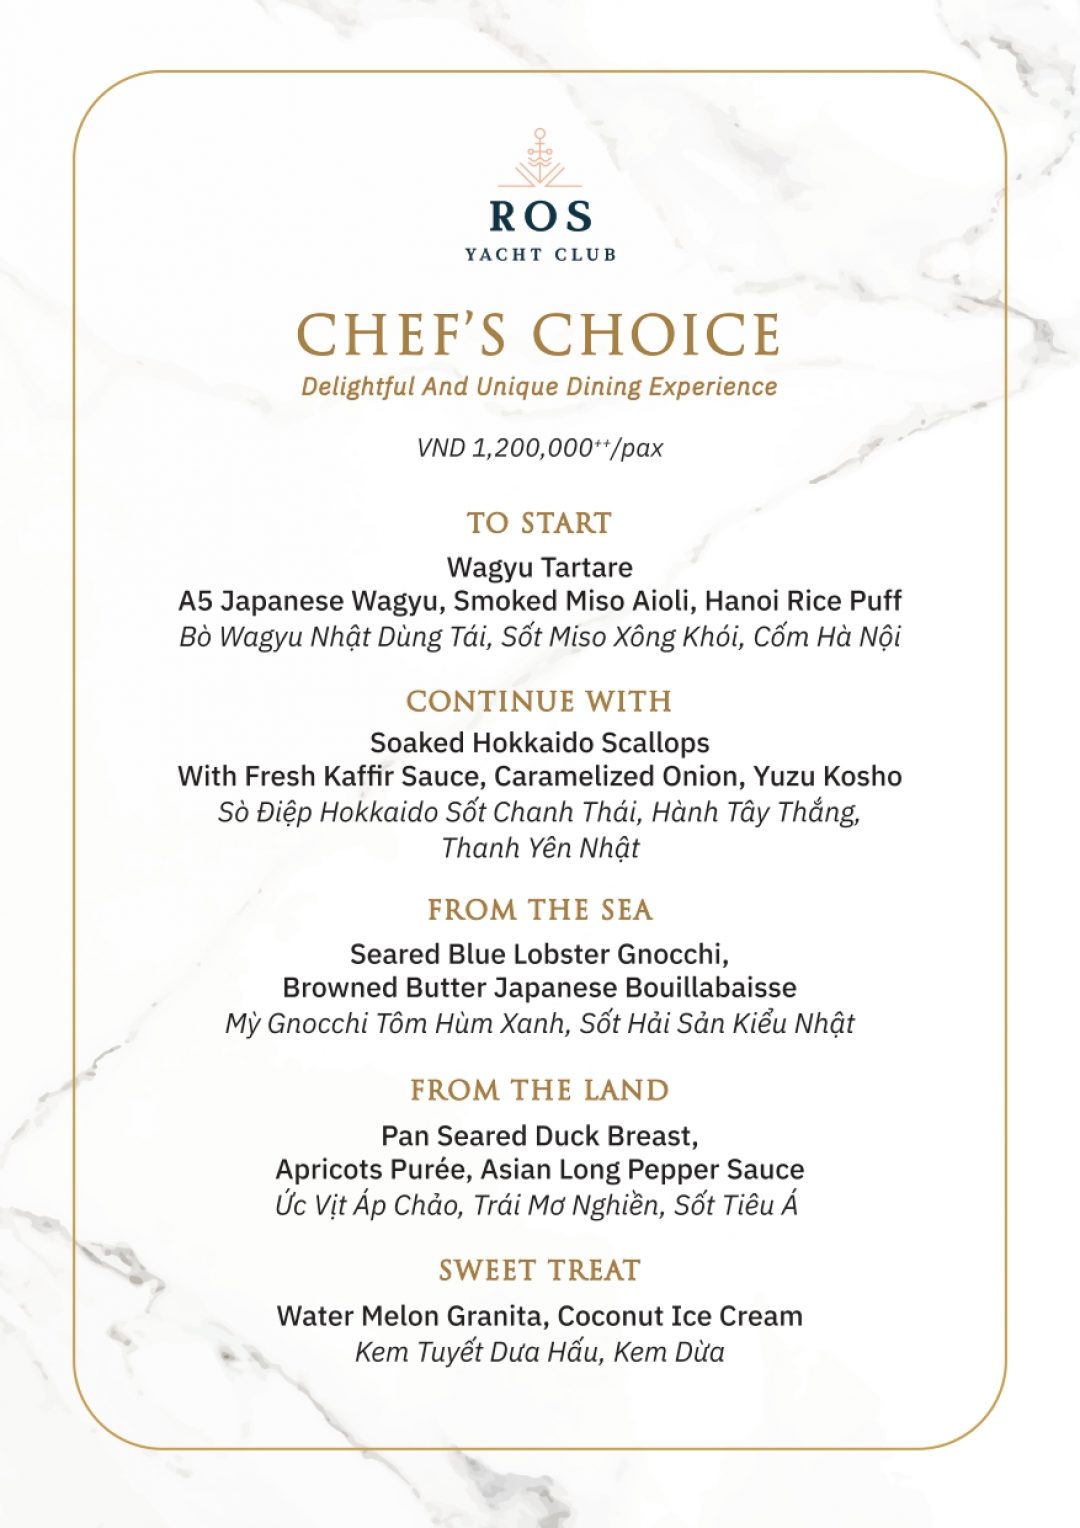 File in ROS Chef Choice Set Menu 1200 - wprice_page-0001